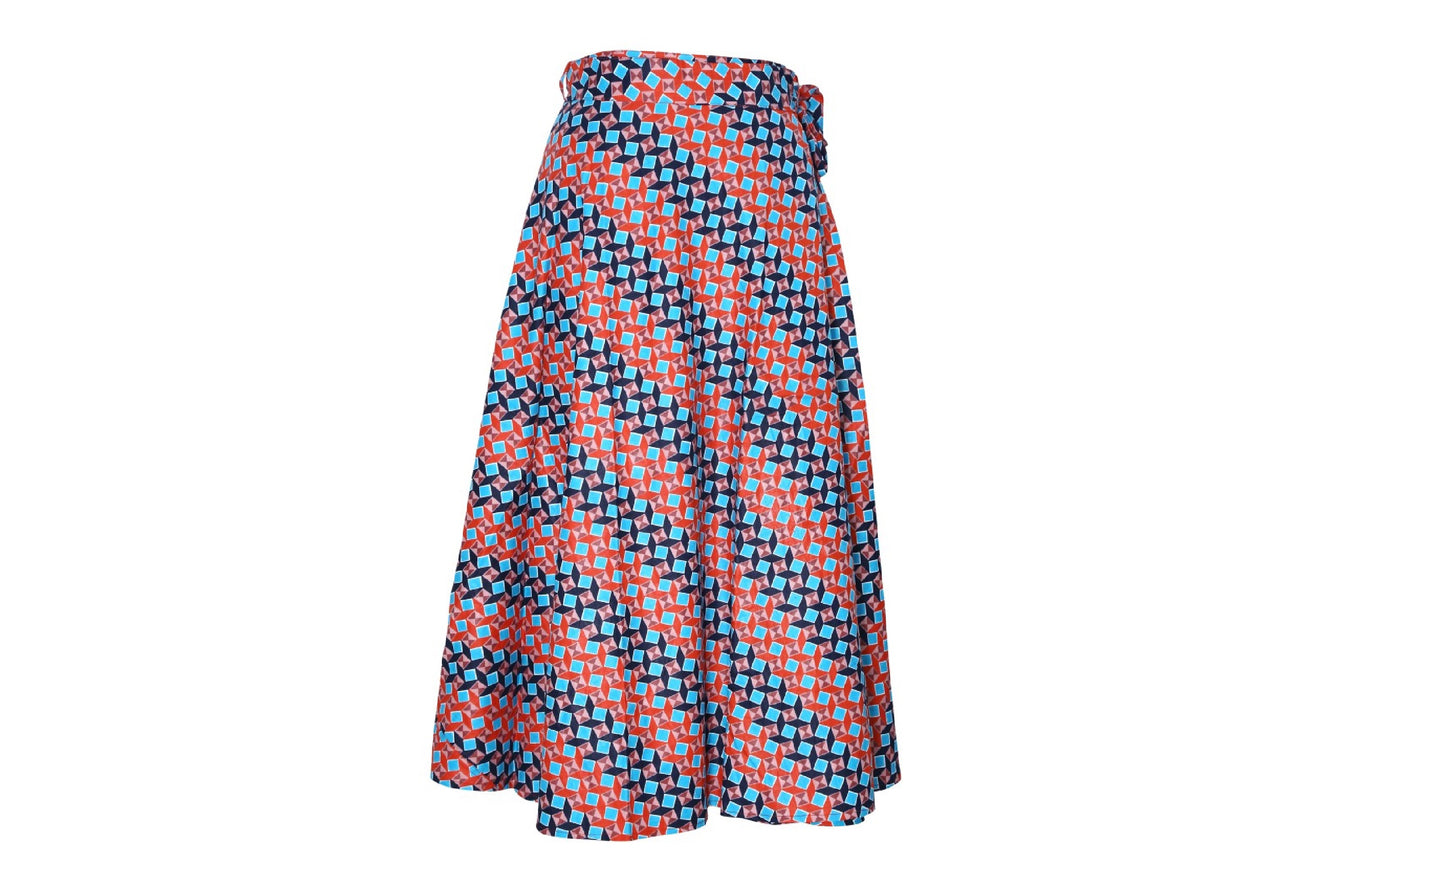 Traditional African Print Cotton Skirts (Maxi Skirt)